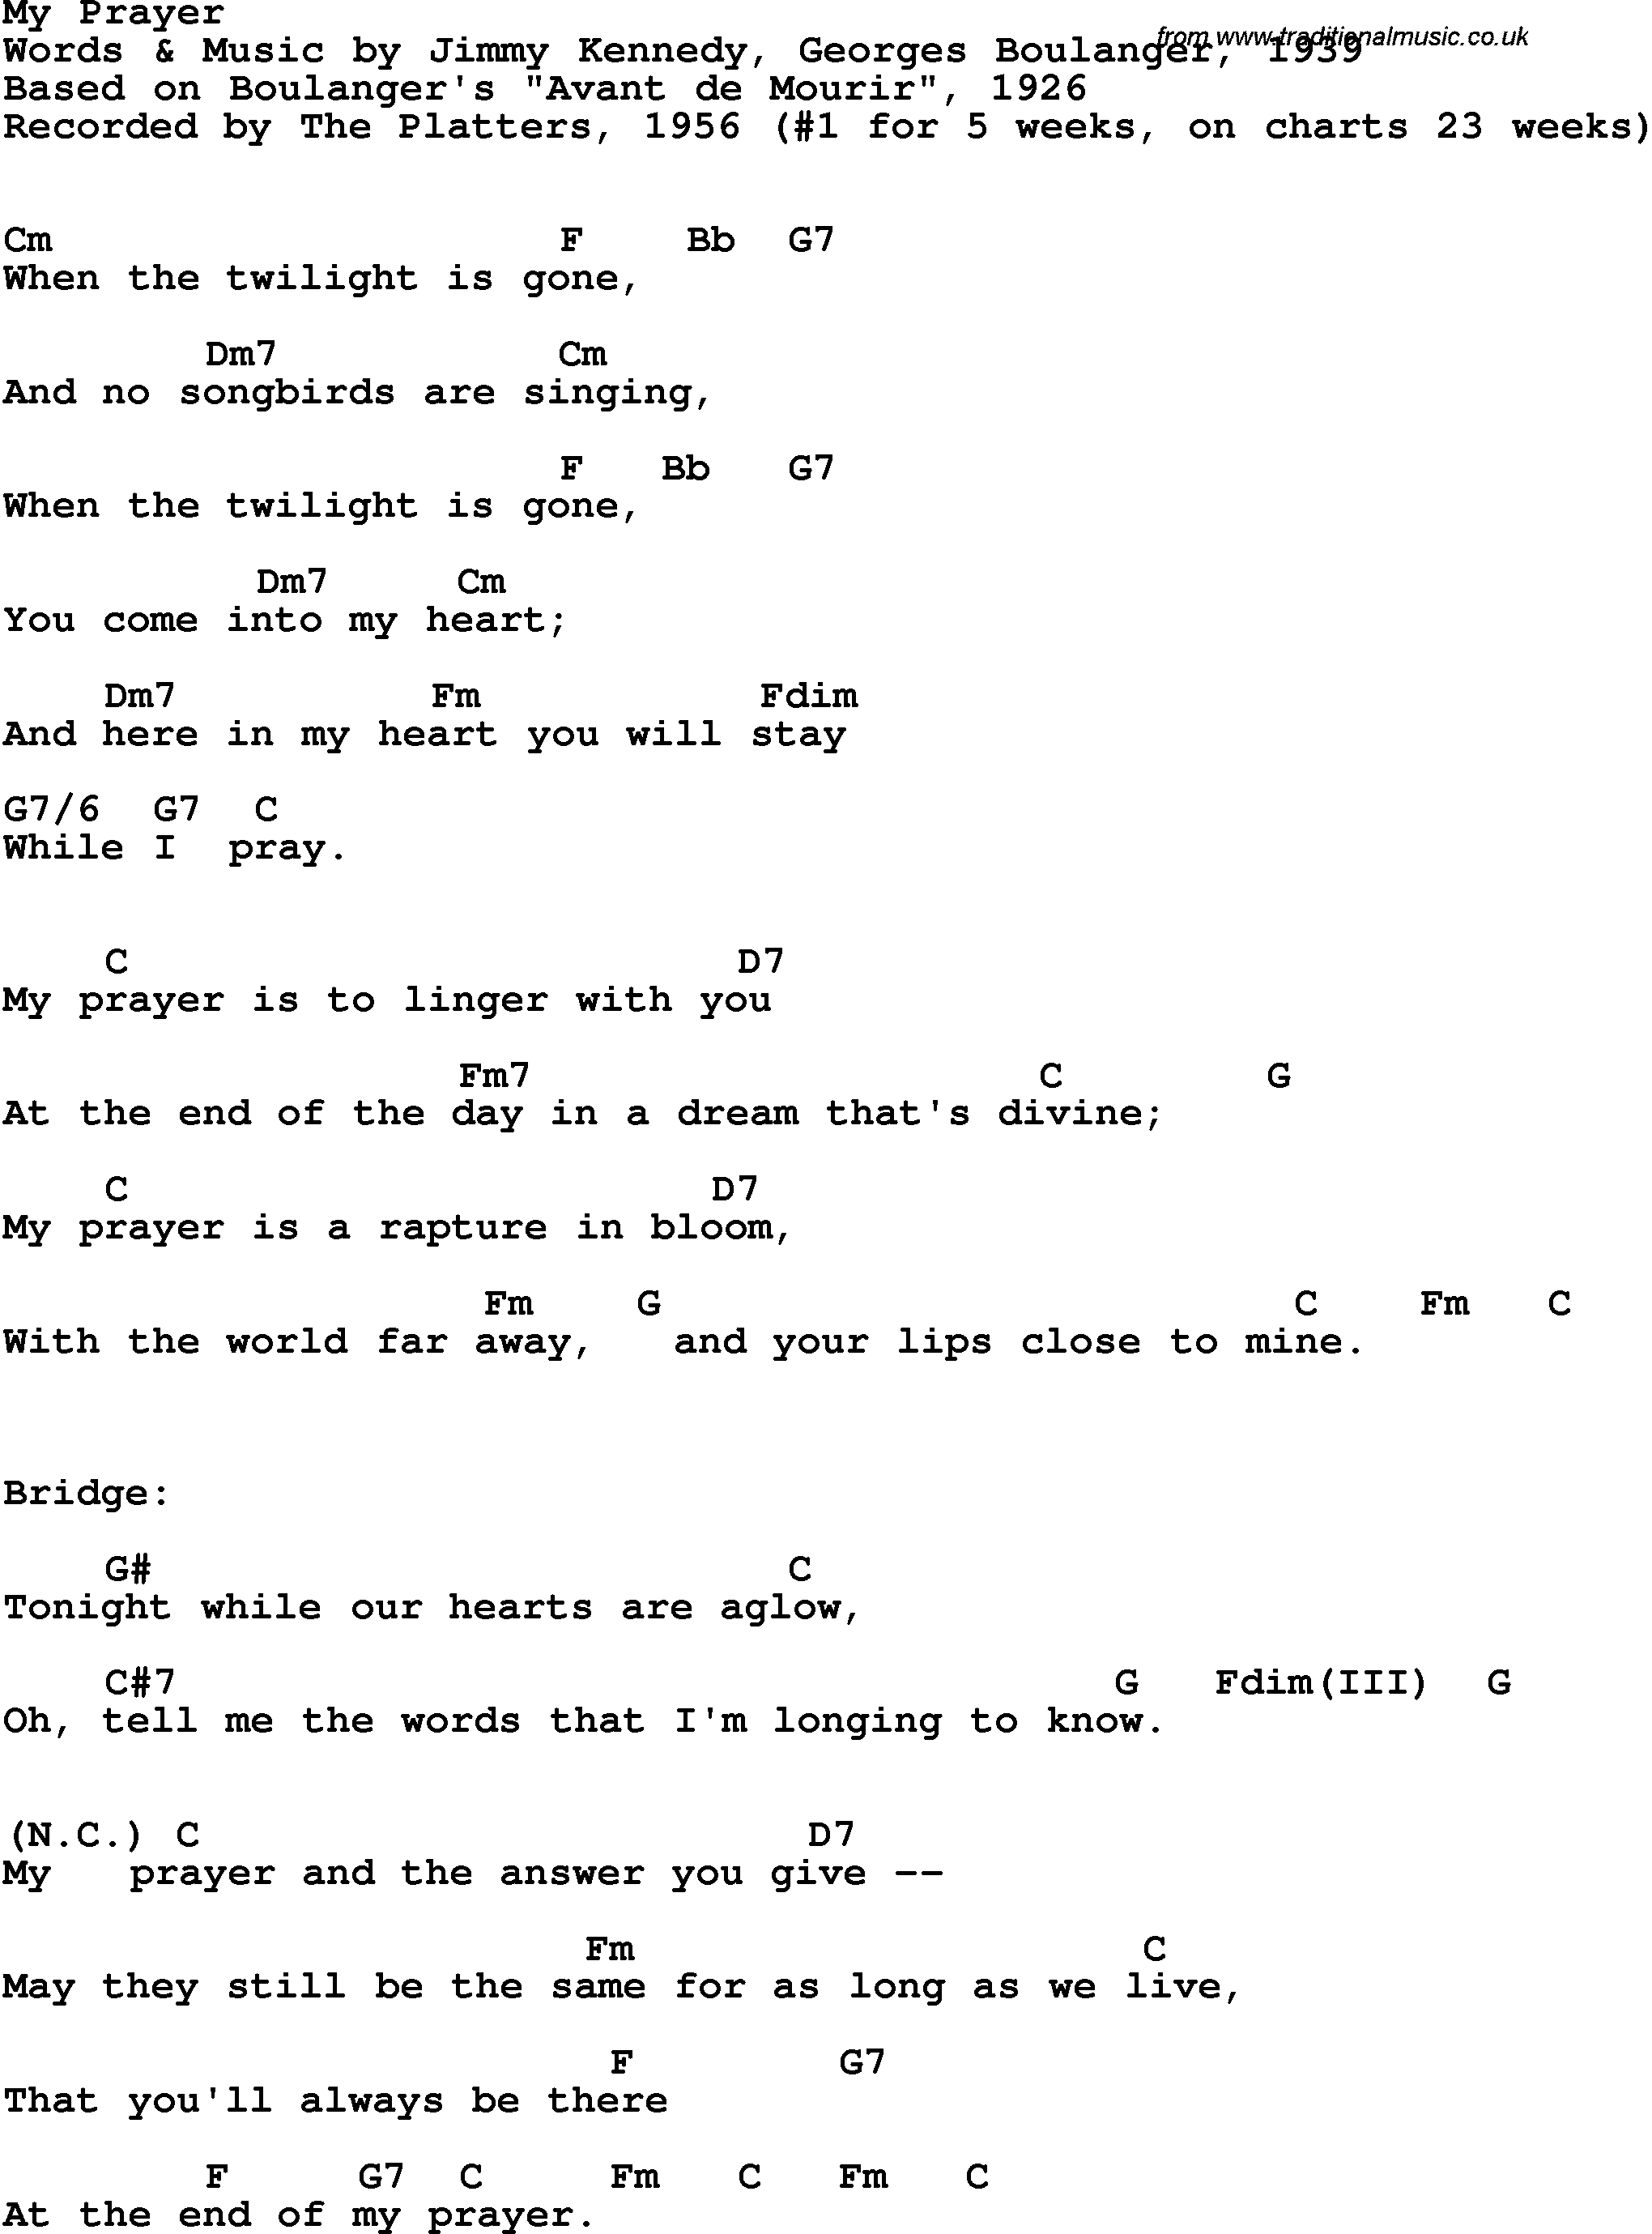 Song Lyrics with guitar chords for My Prayer - The Platters, 1956